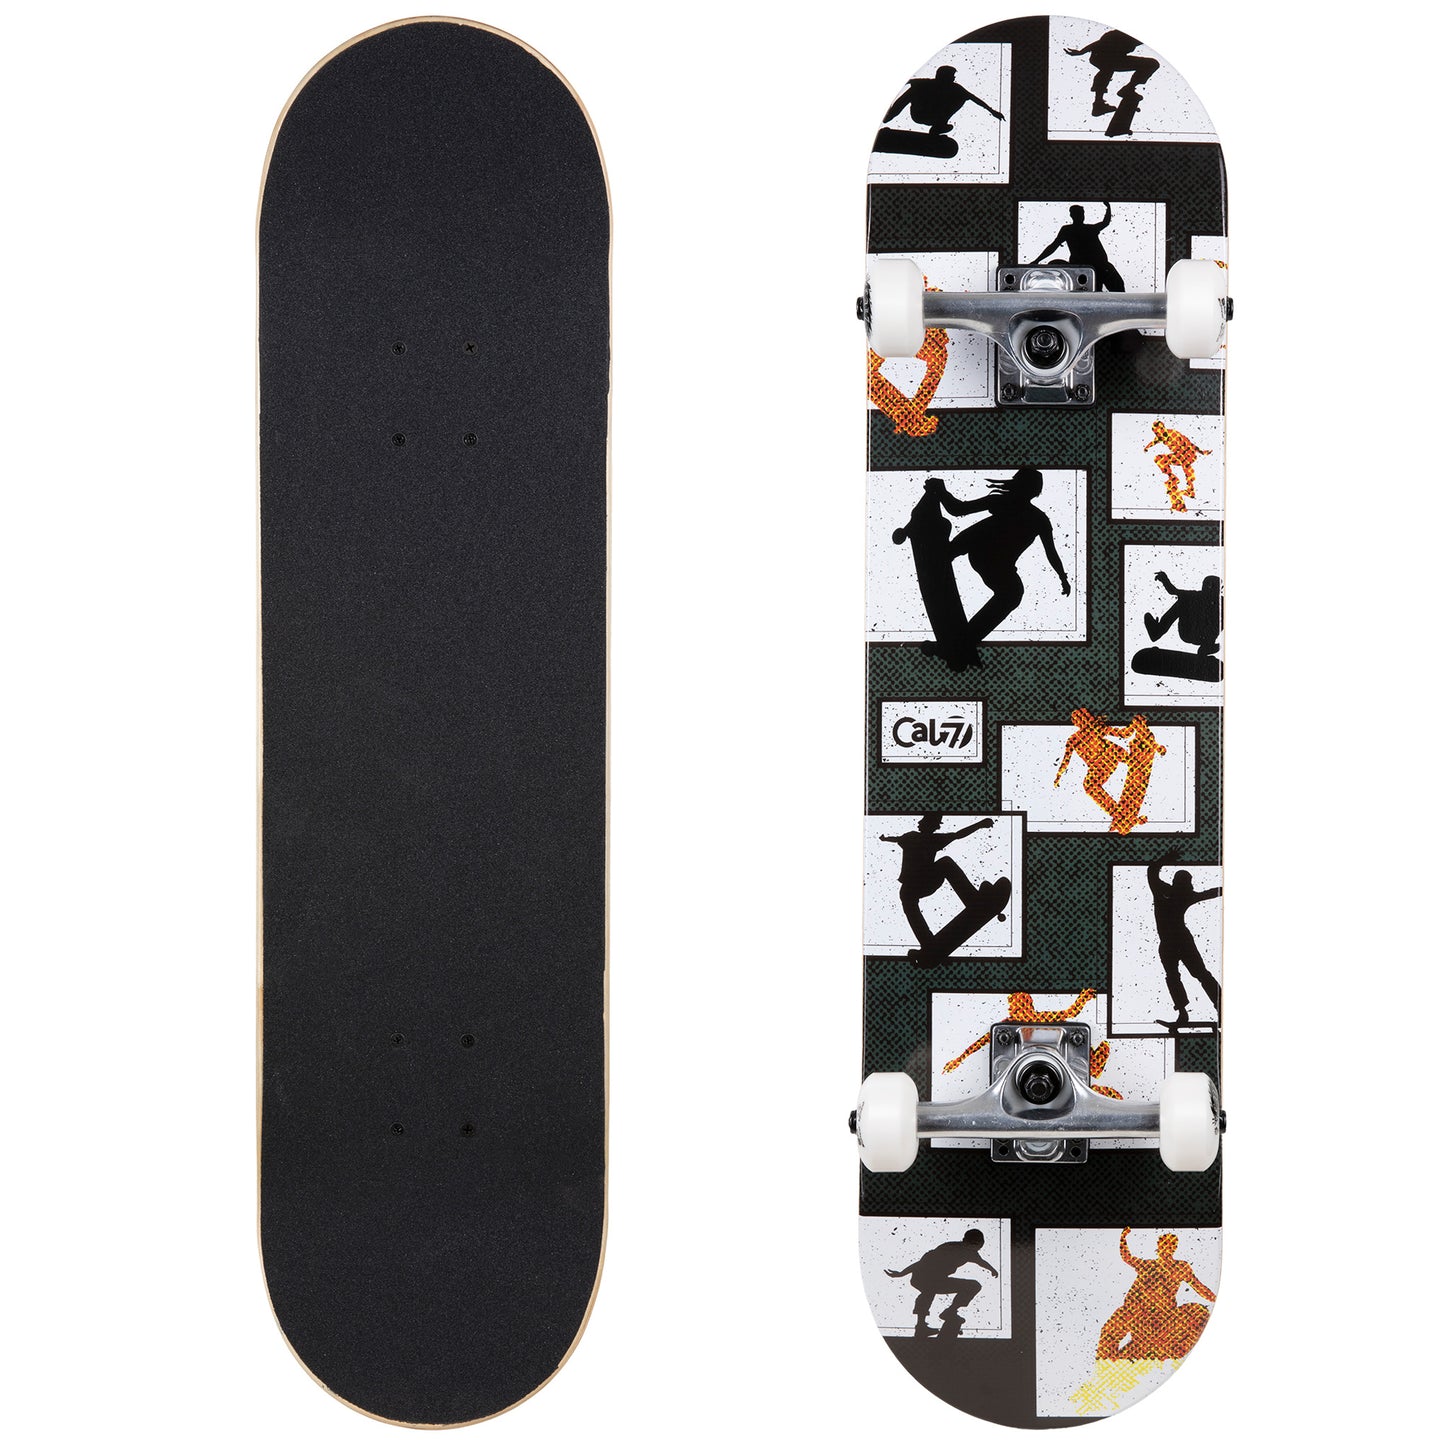 Cal 7 Complete 7.5/7.75/8-Inch Skateboard Panel with Skateboarding Graphic Design 